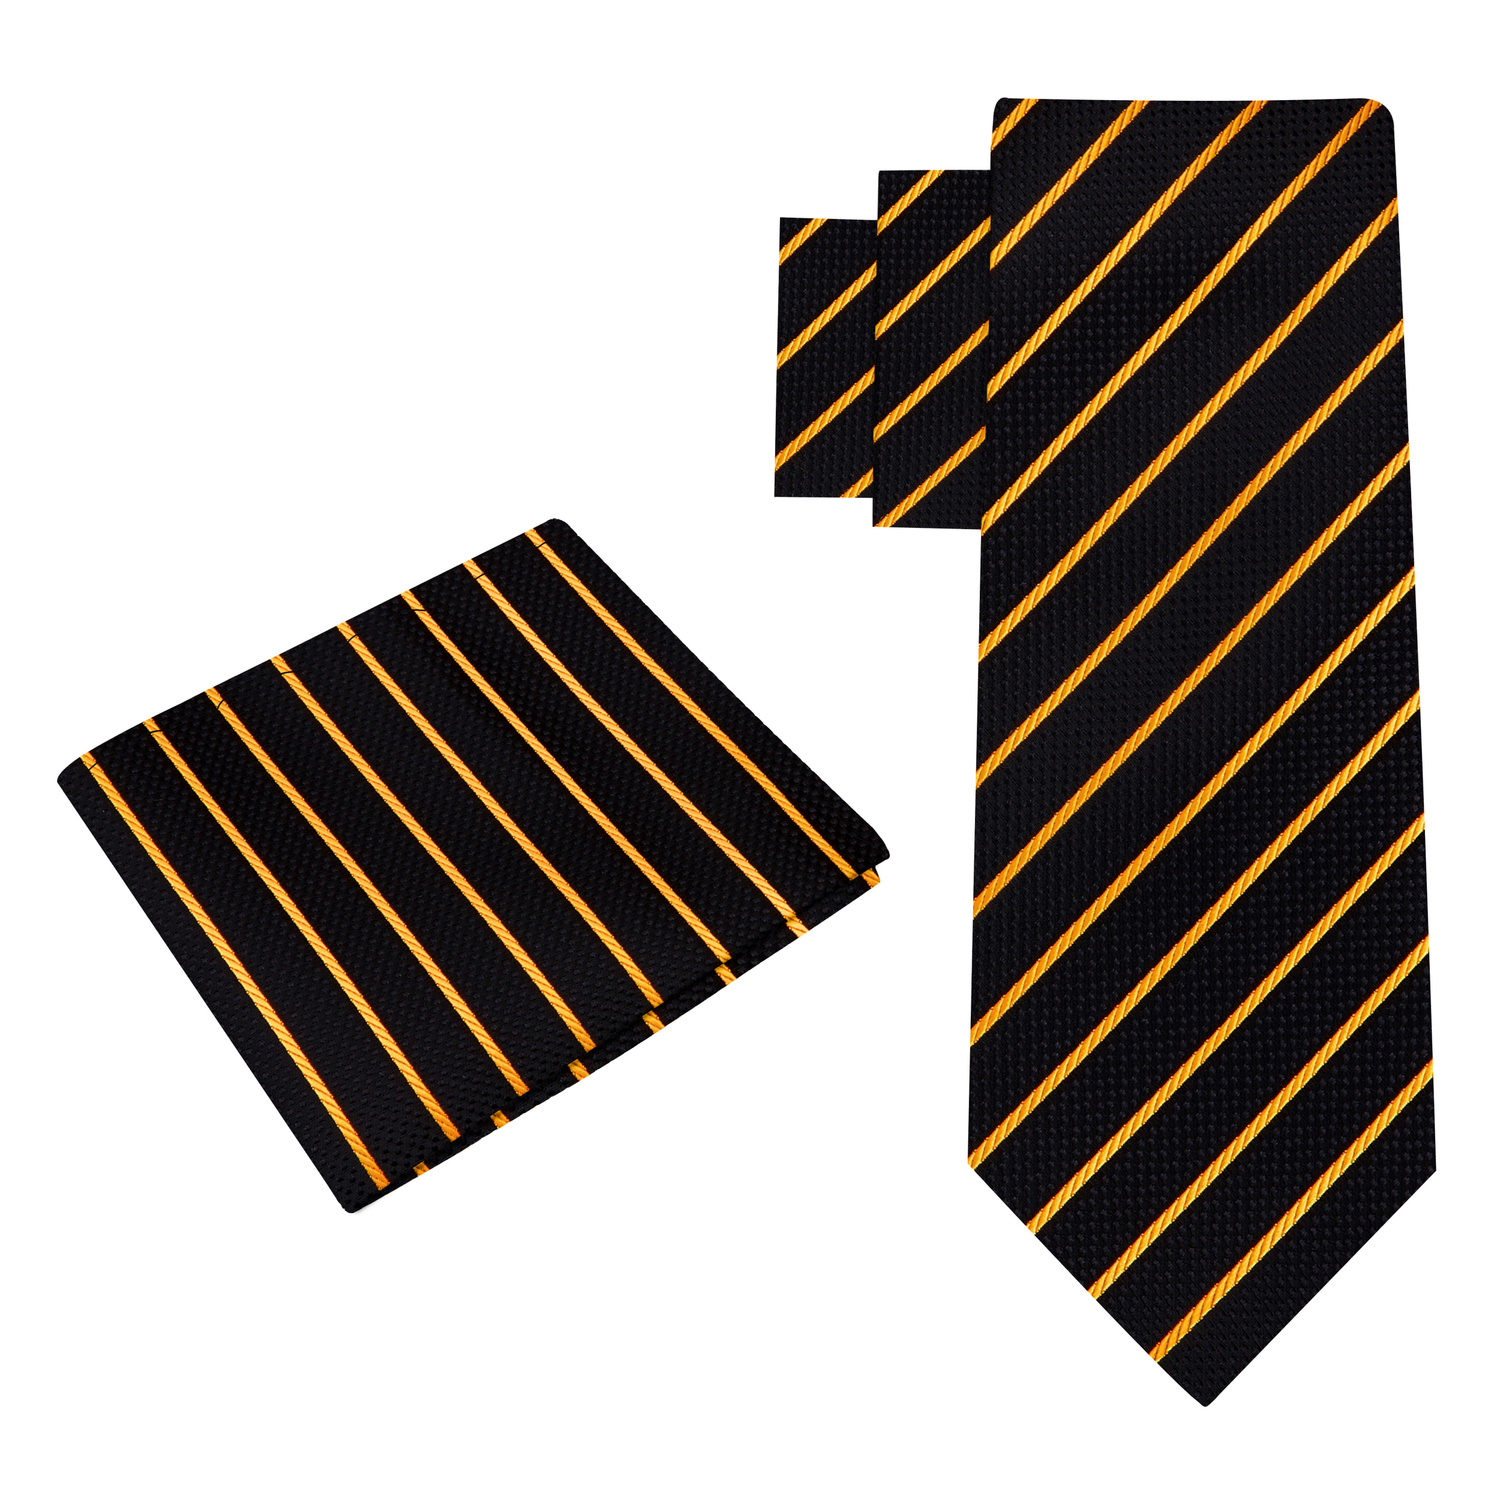 Alt View: Black, Gold Stripe Necktie and Matching Square